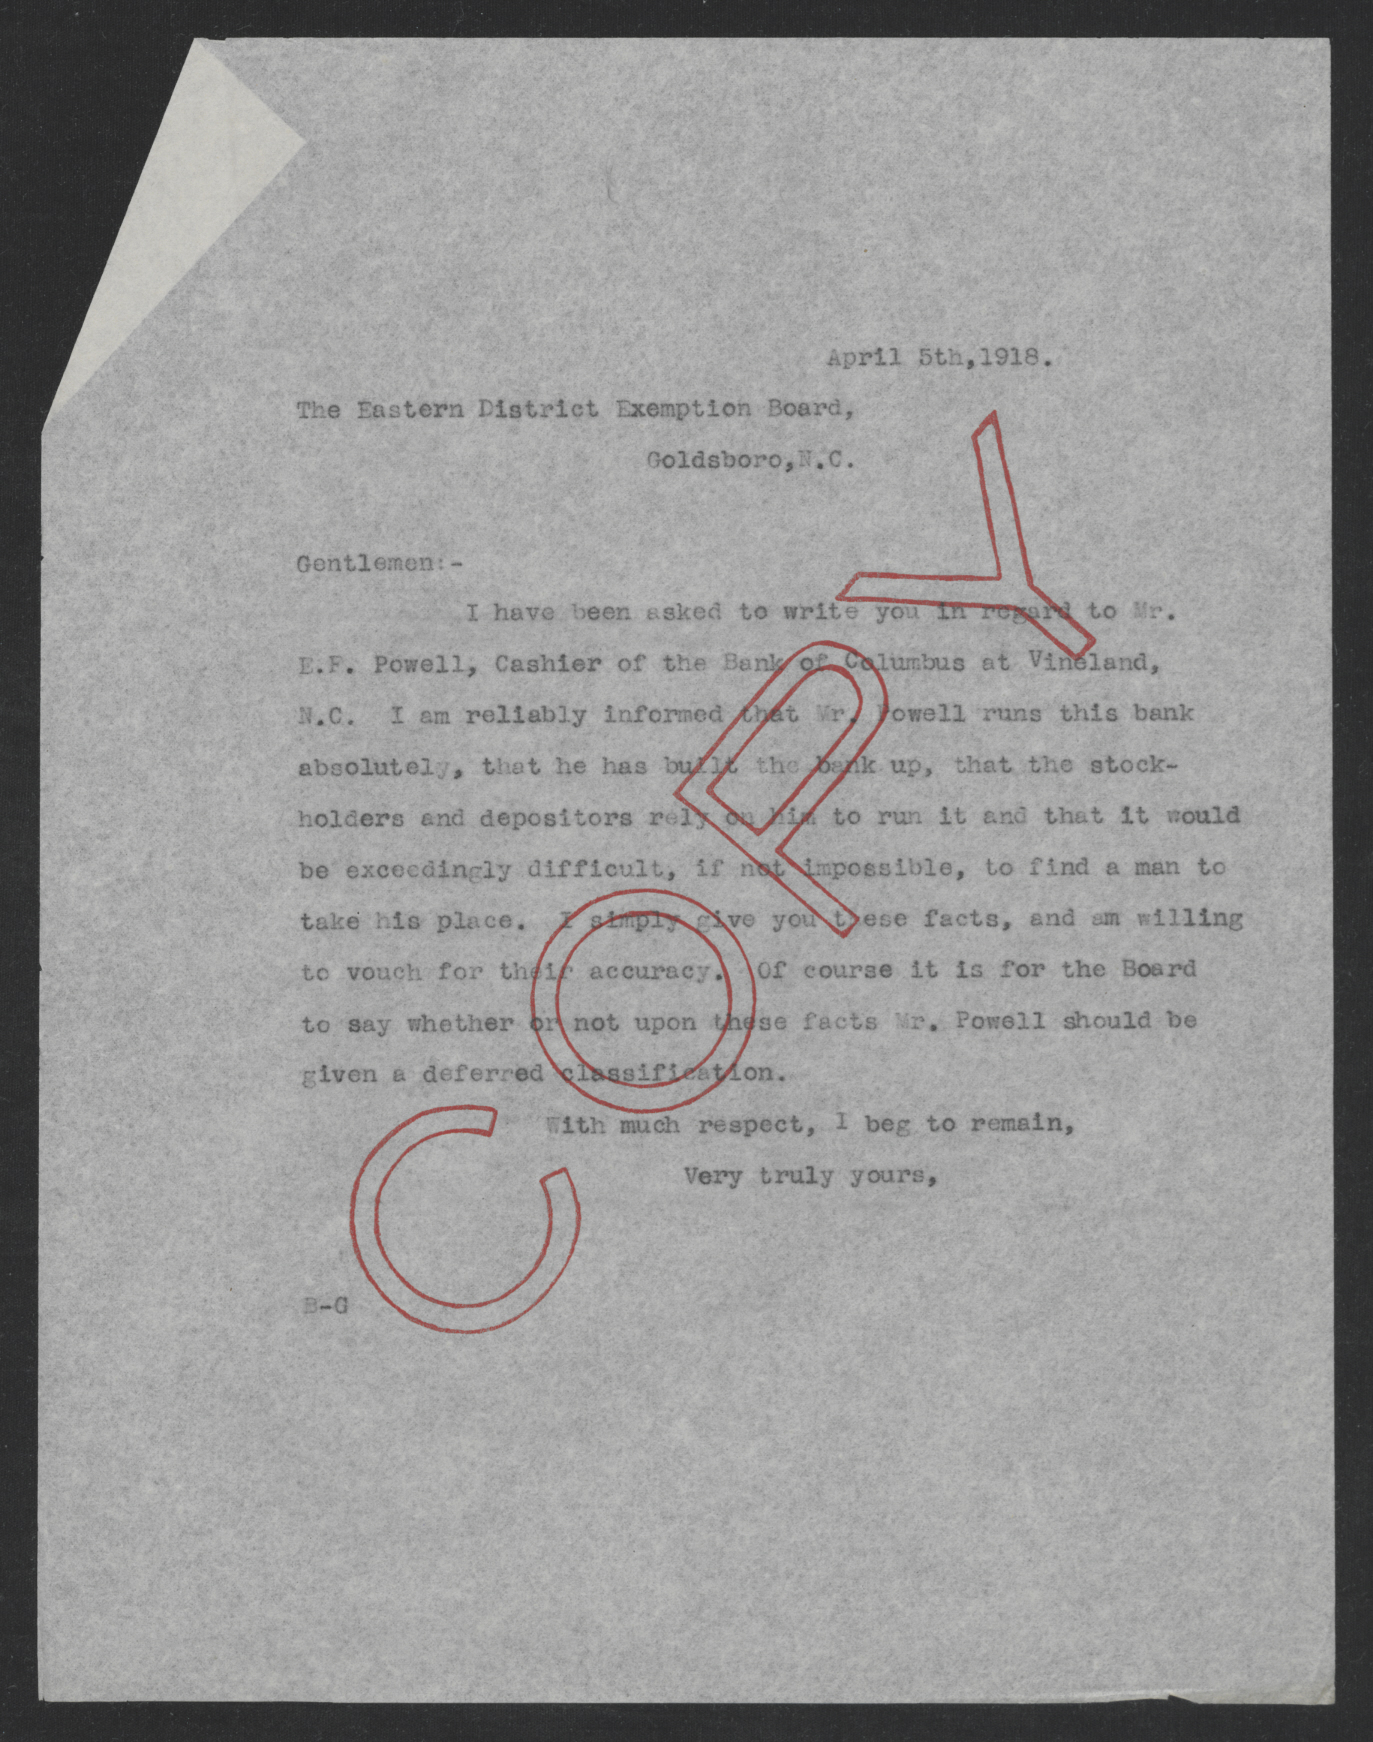 Letter from Thomas W. Bickett to the Eastern District Exemption Board, April 5, 1918